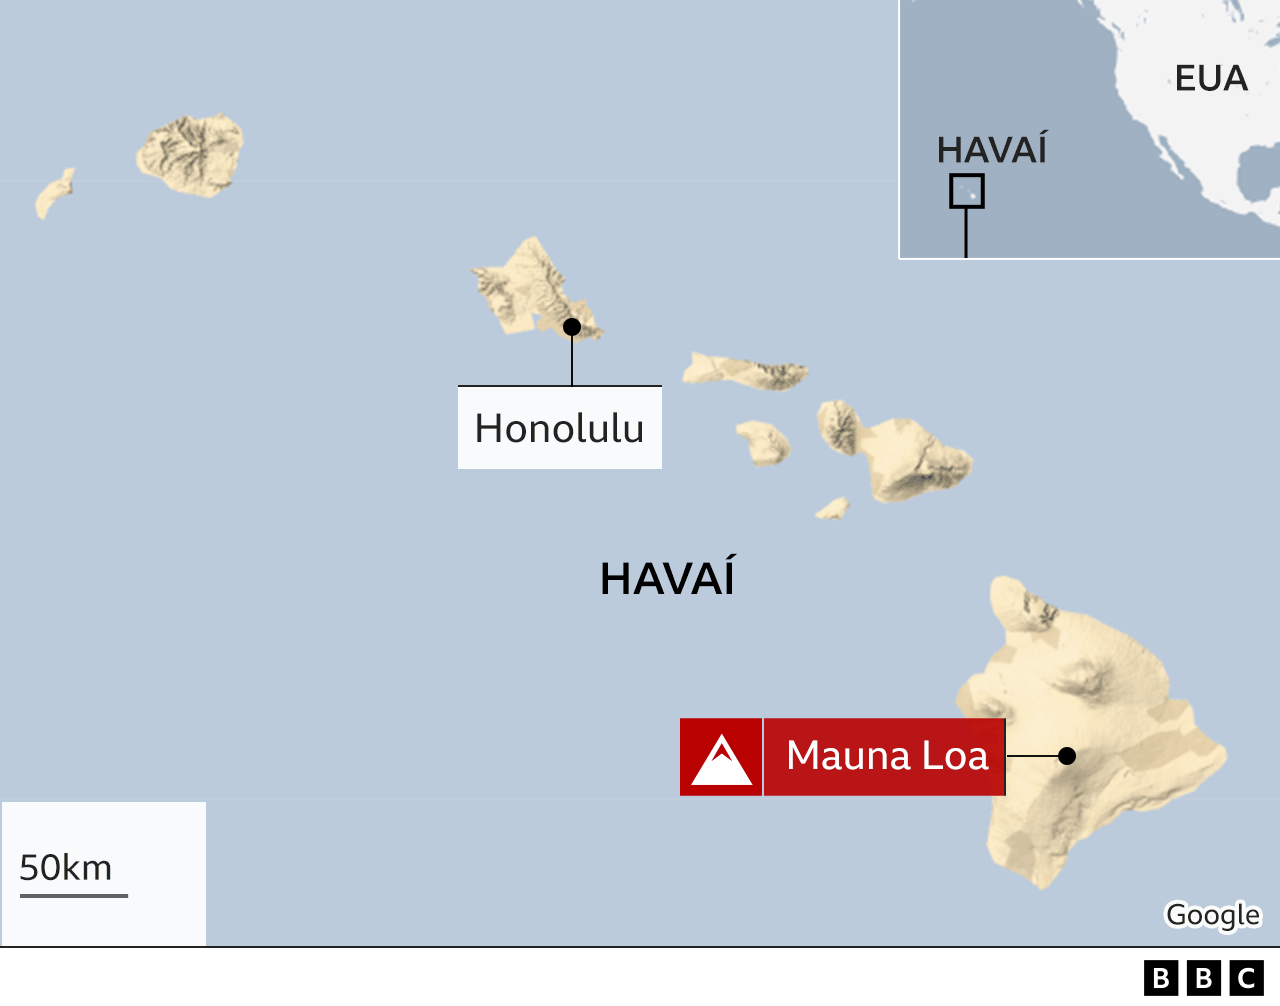 Map of Hawaii showing where the volcano is located